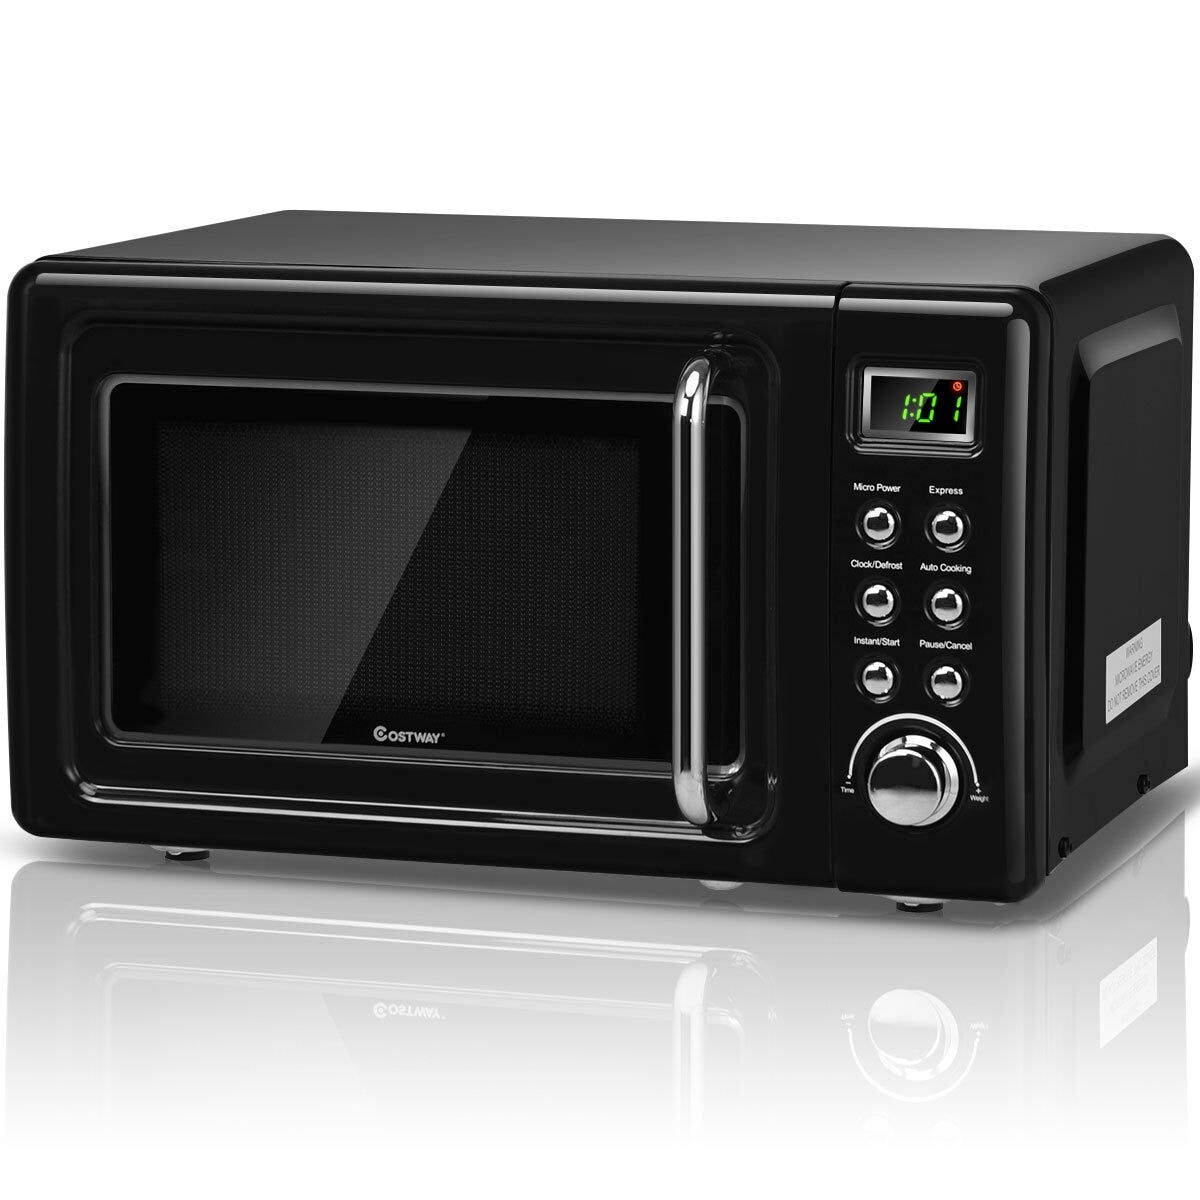 Black + Decker 0.9 Cu Ft 900w Digital Microwave Oven With Turntable In  Stainless, Microwave Ovens, Furniture & Appliances